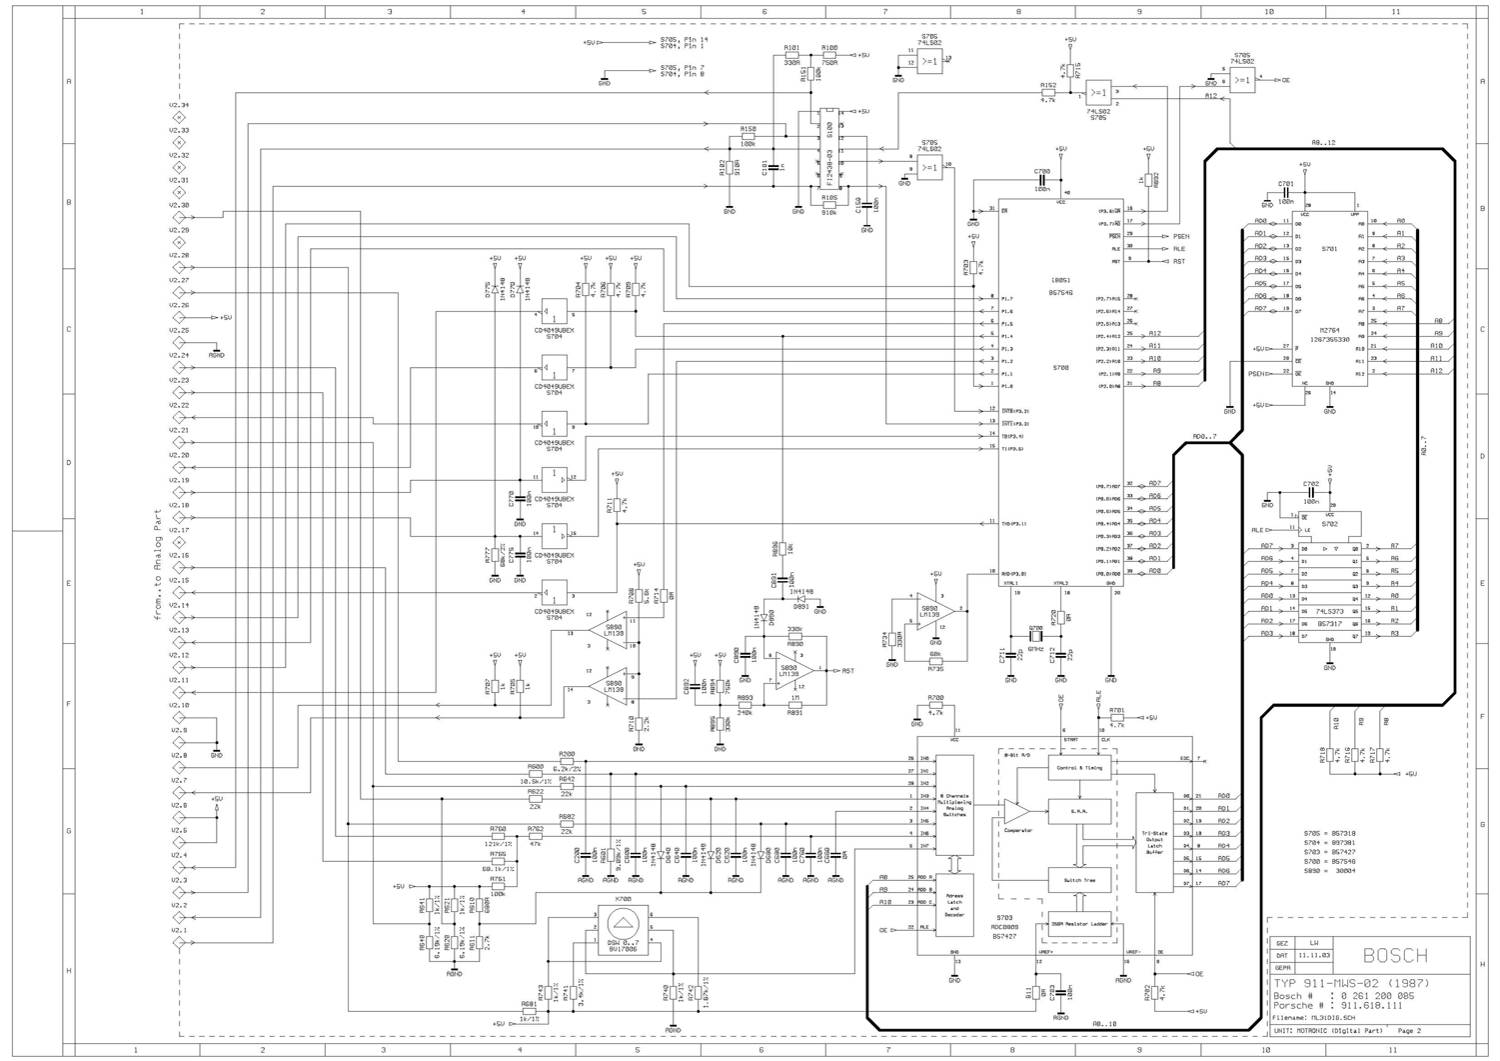 DME Wiring Diagram - Normally Aspirated 944